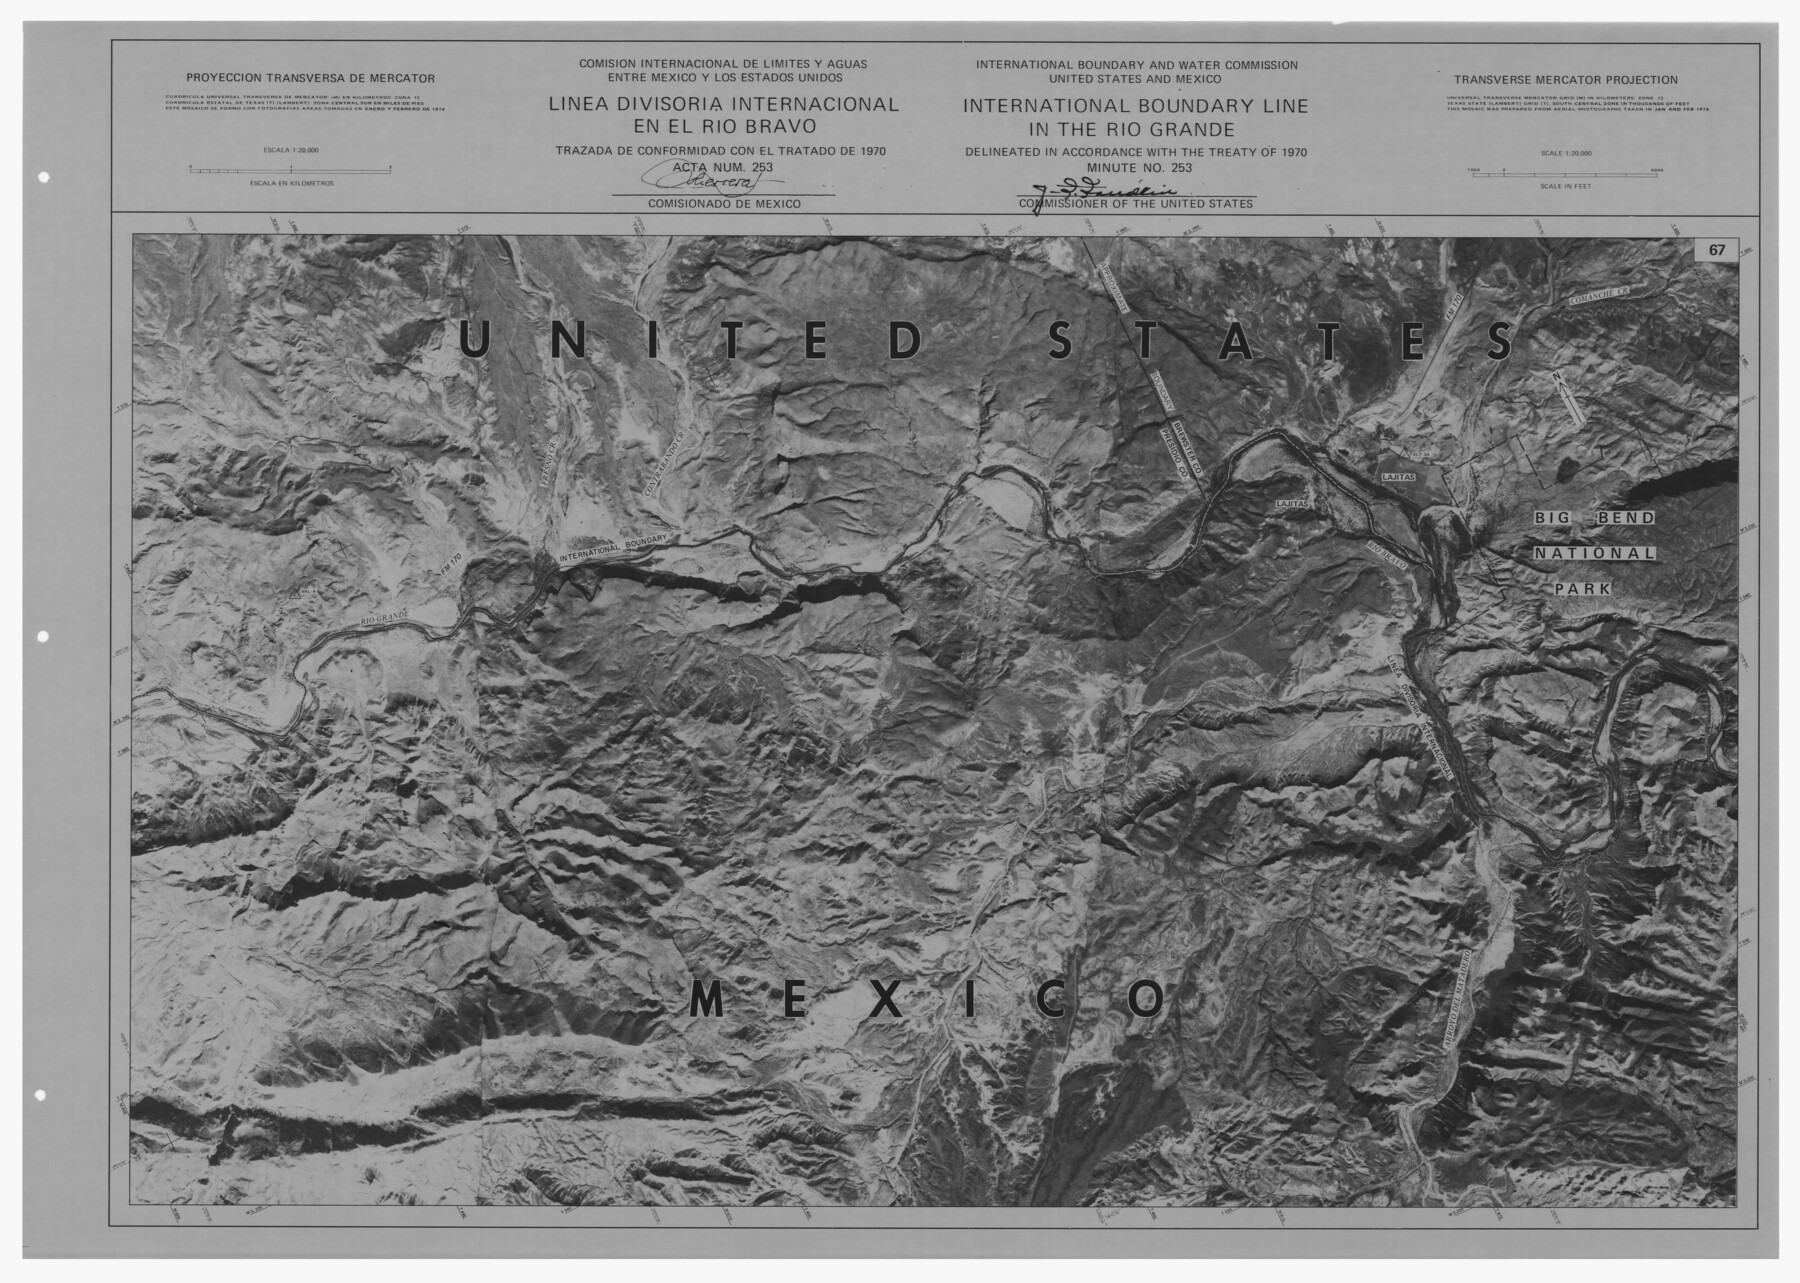 7644, International boundary between the United States and Mexico in the Rio Grande and Colorado River delineated in accordance with the Treaty of November 23, 1970 - (Volumes 1 and 2), General Map Collection